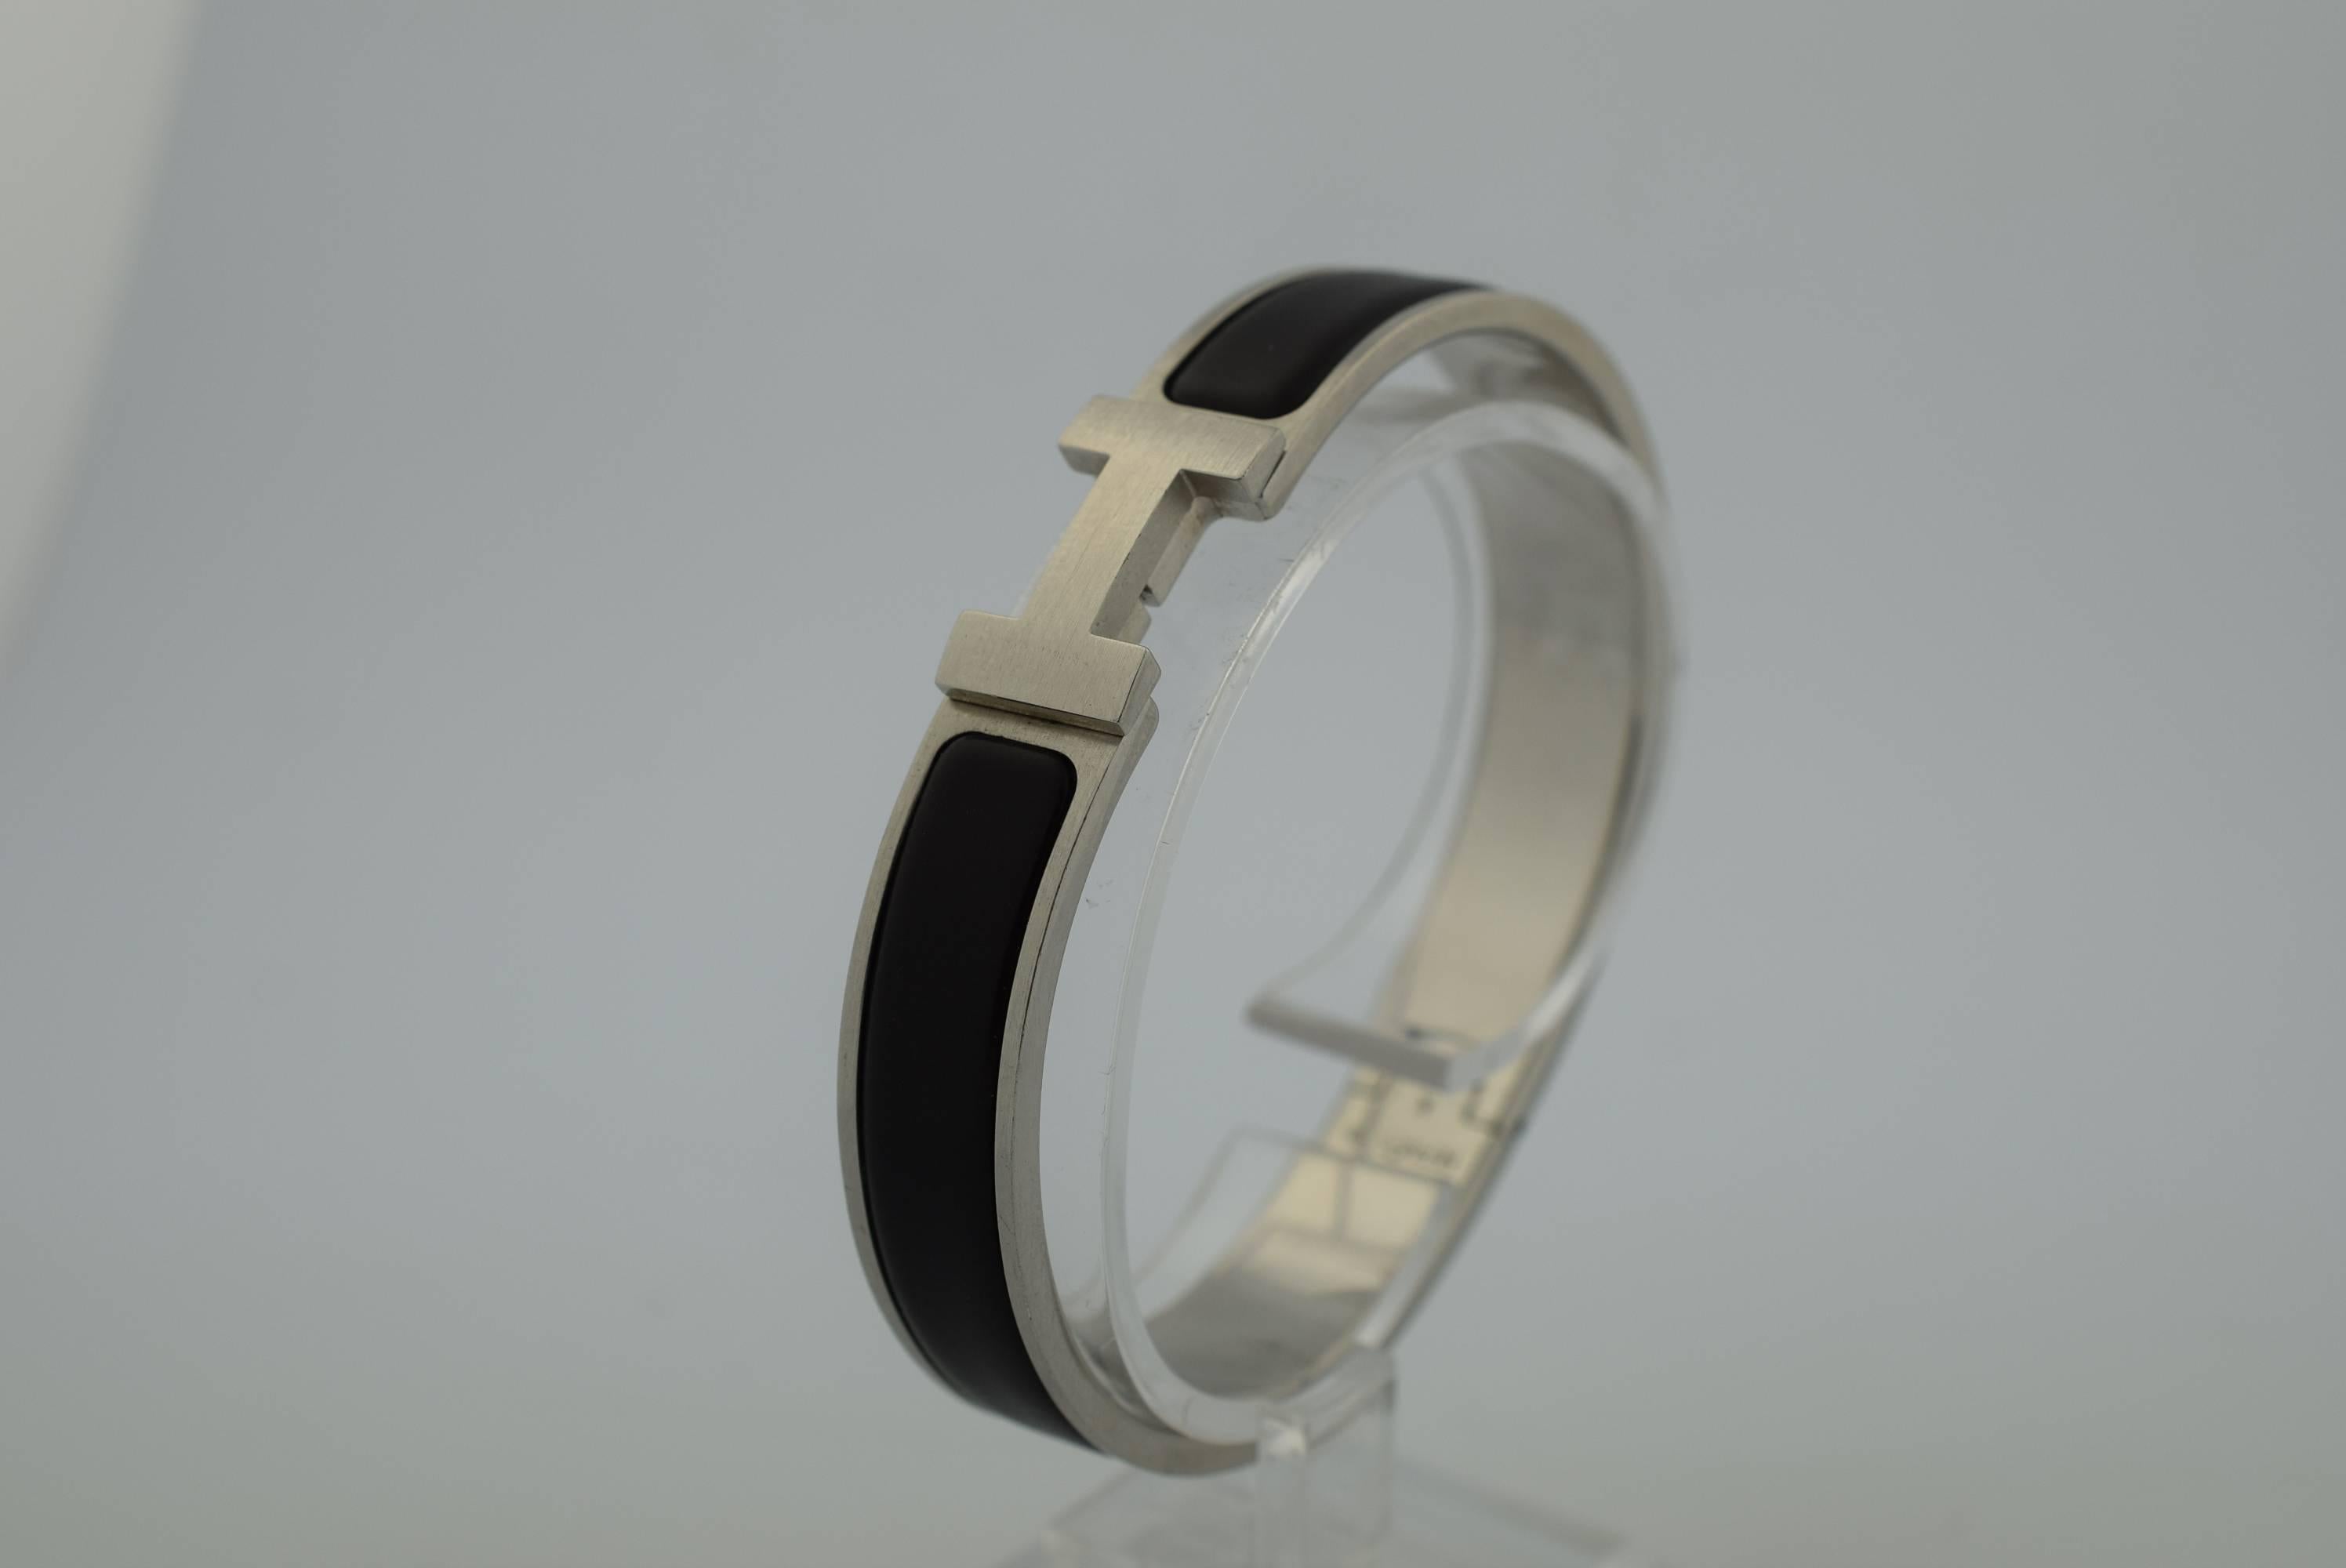 Hermes Black Clic HH Mens Bracelet with brushed palladium hardware.
This is an 8